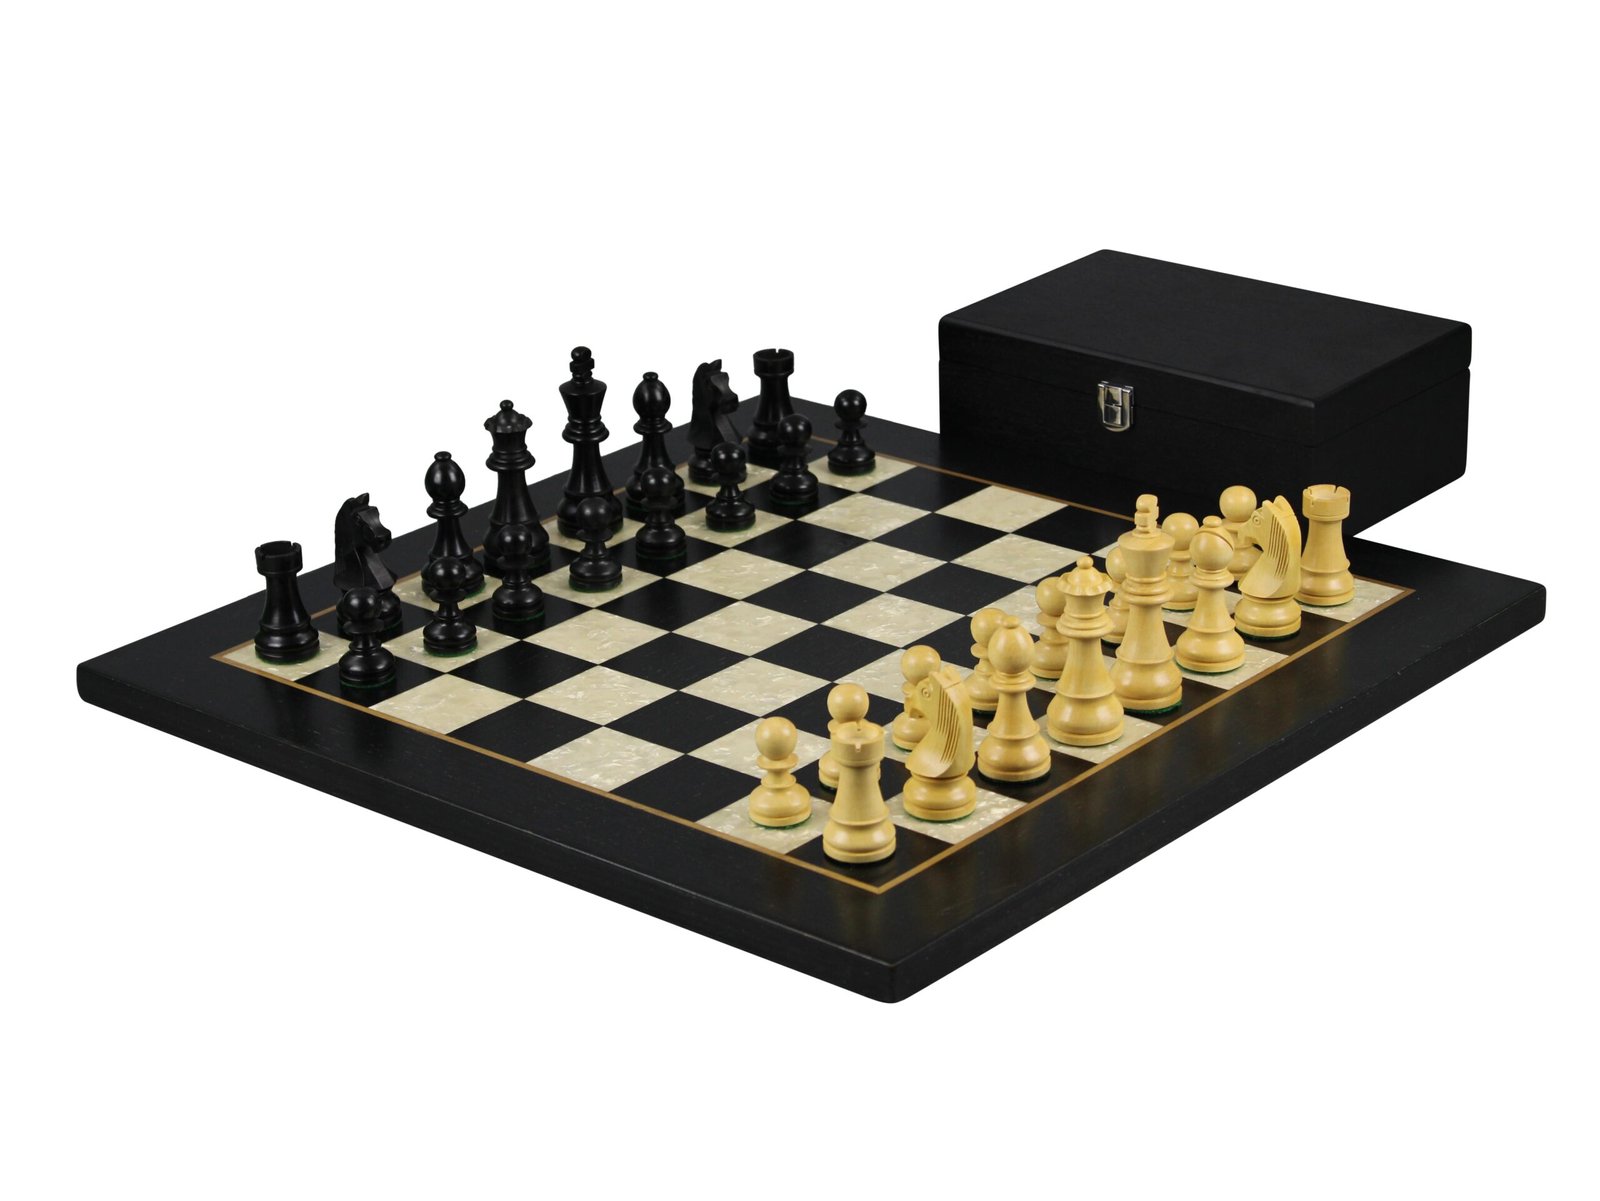 Ebony Chess Set 20 Inch with Helena Mother of Pearl Flat Chess Board and Weighted Ebonised German Staunton Chess Pieces 3.75 Inch